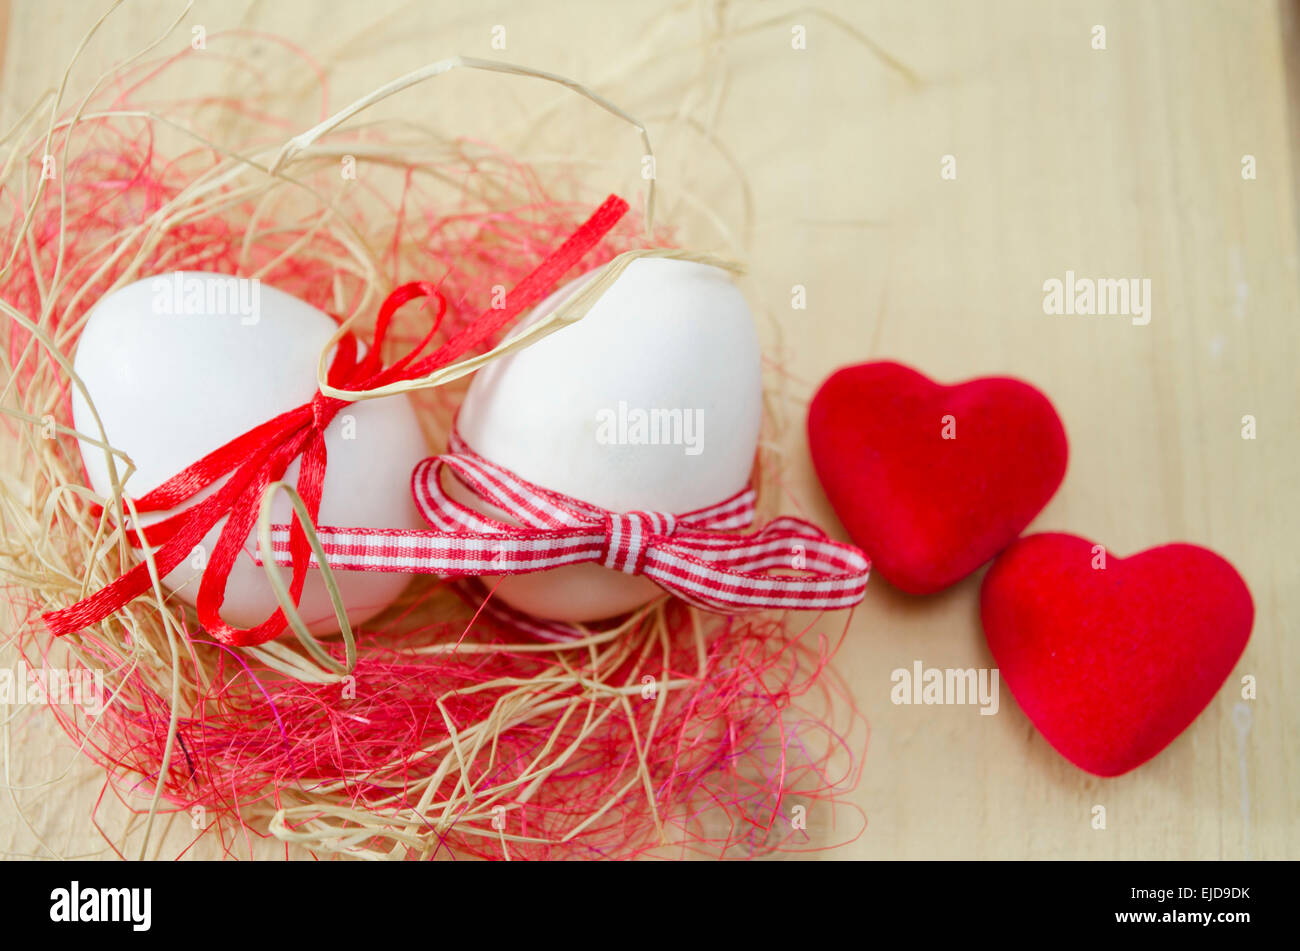 Who white eggs tied with red ribbons lying in a nest. Two small heart shaped pillows on a wooden table. Stock Photo